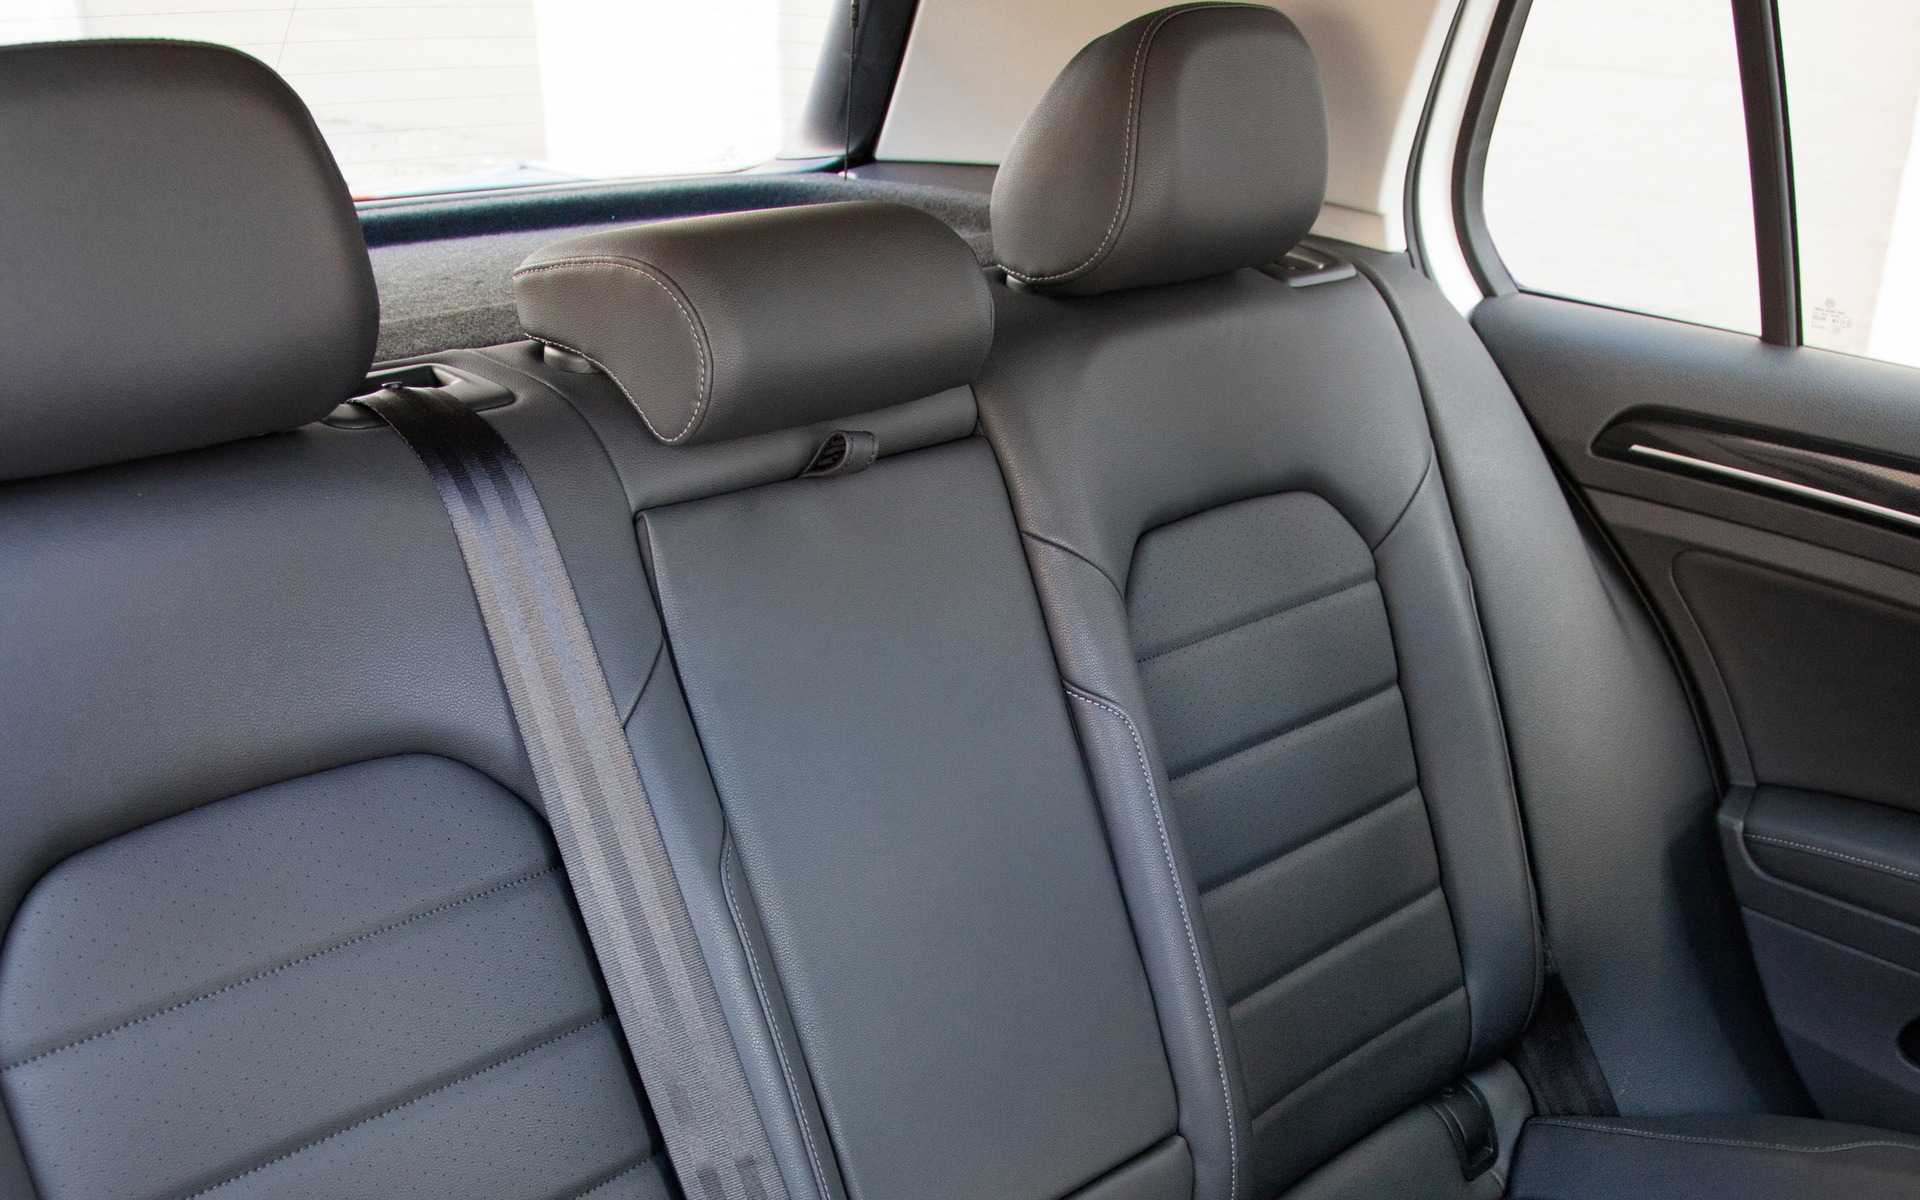 The rear seat folds forward for ample cargo storage.